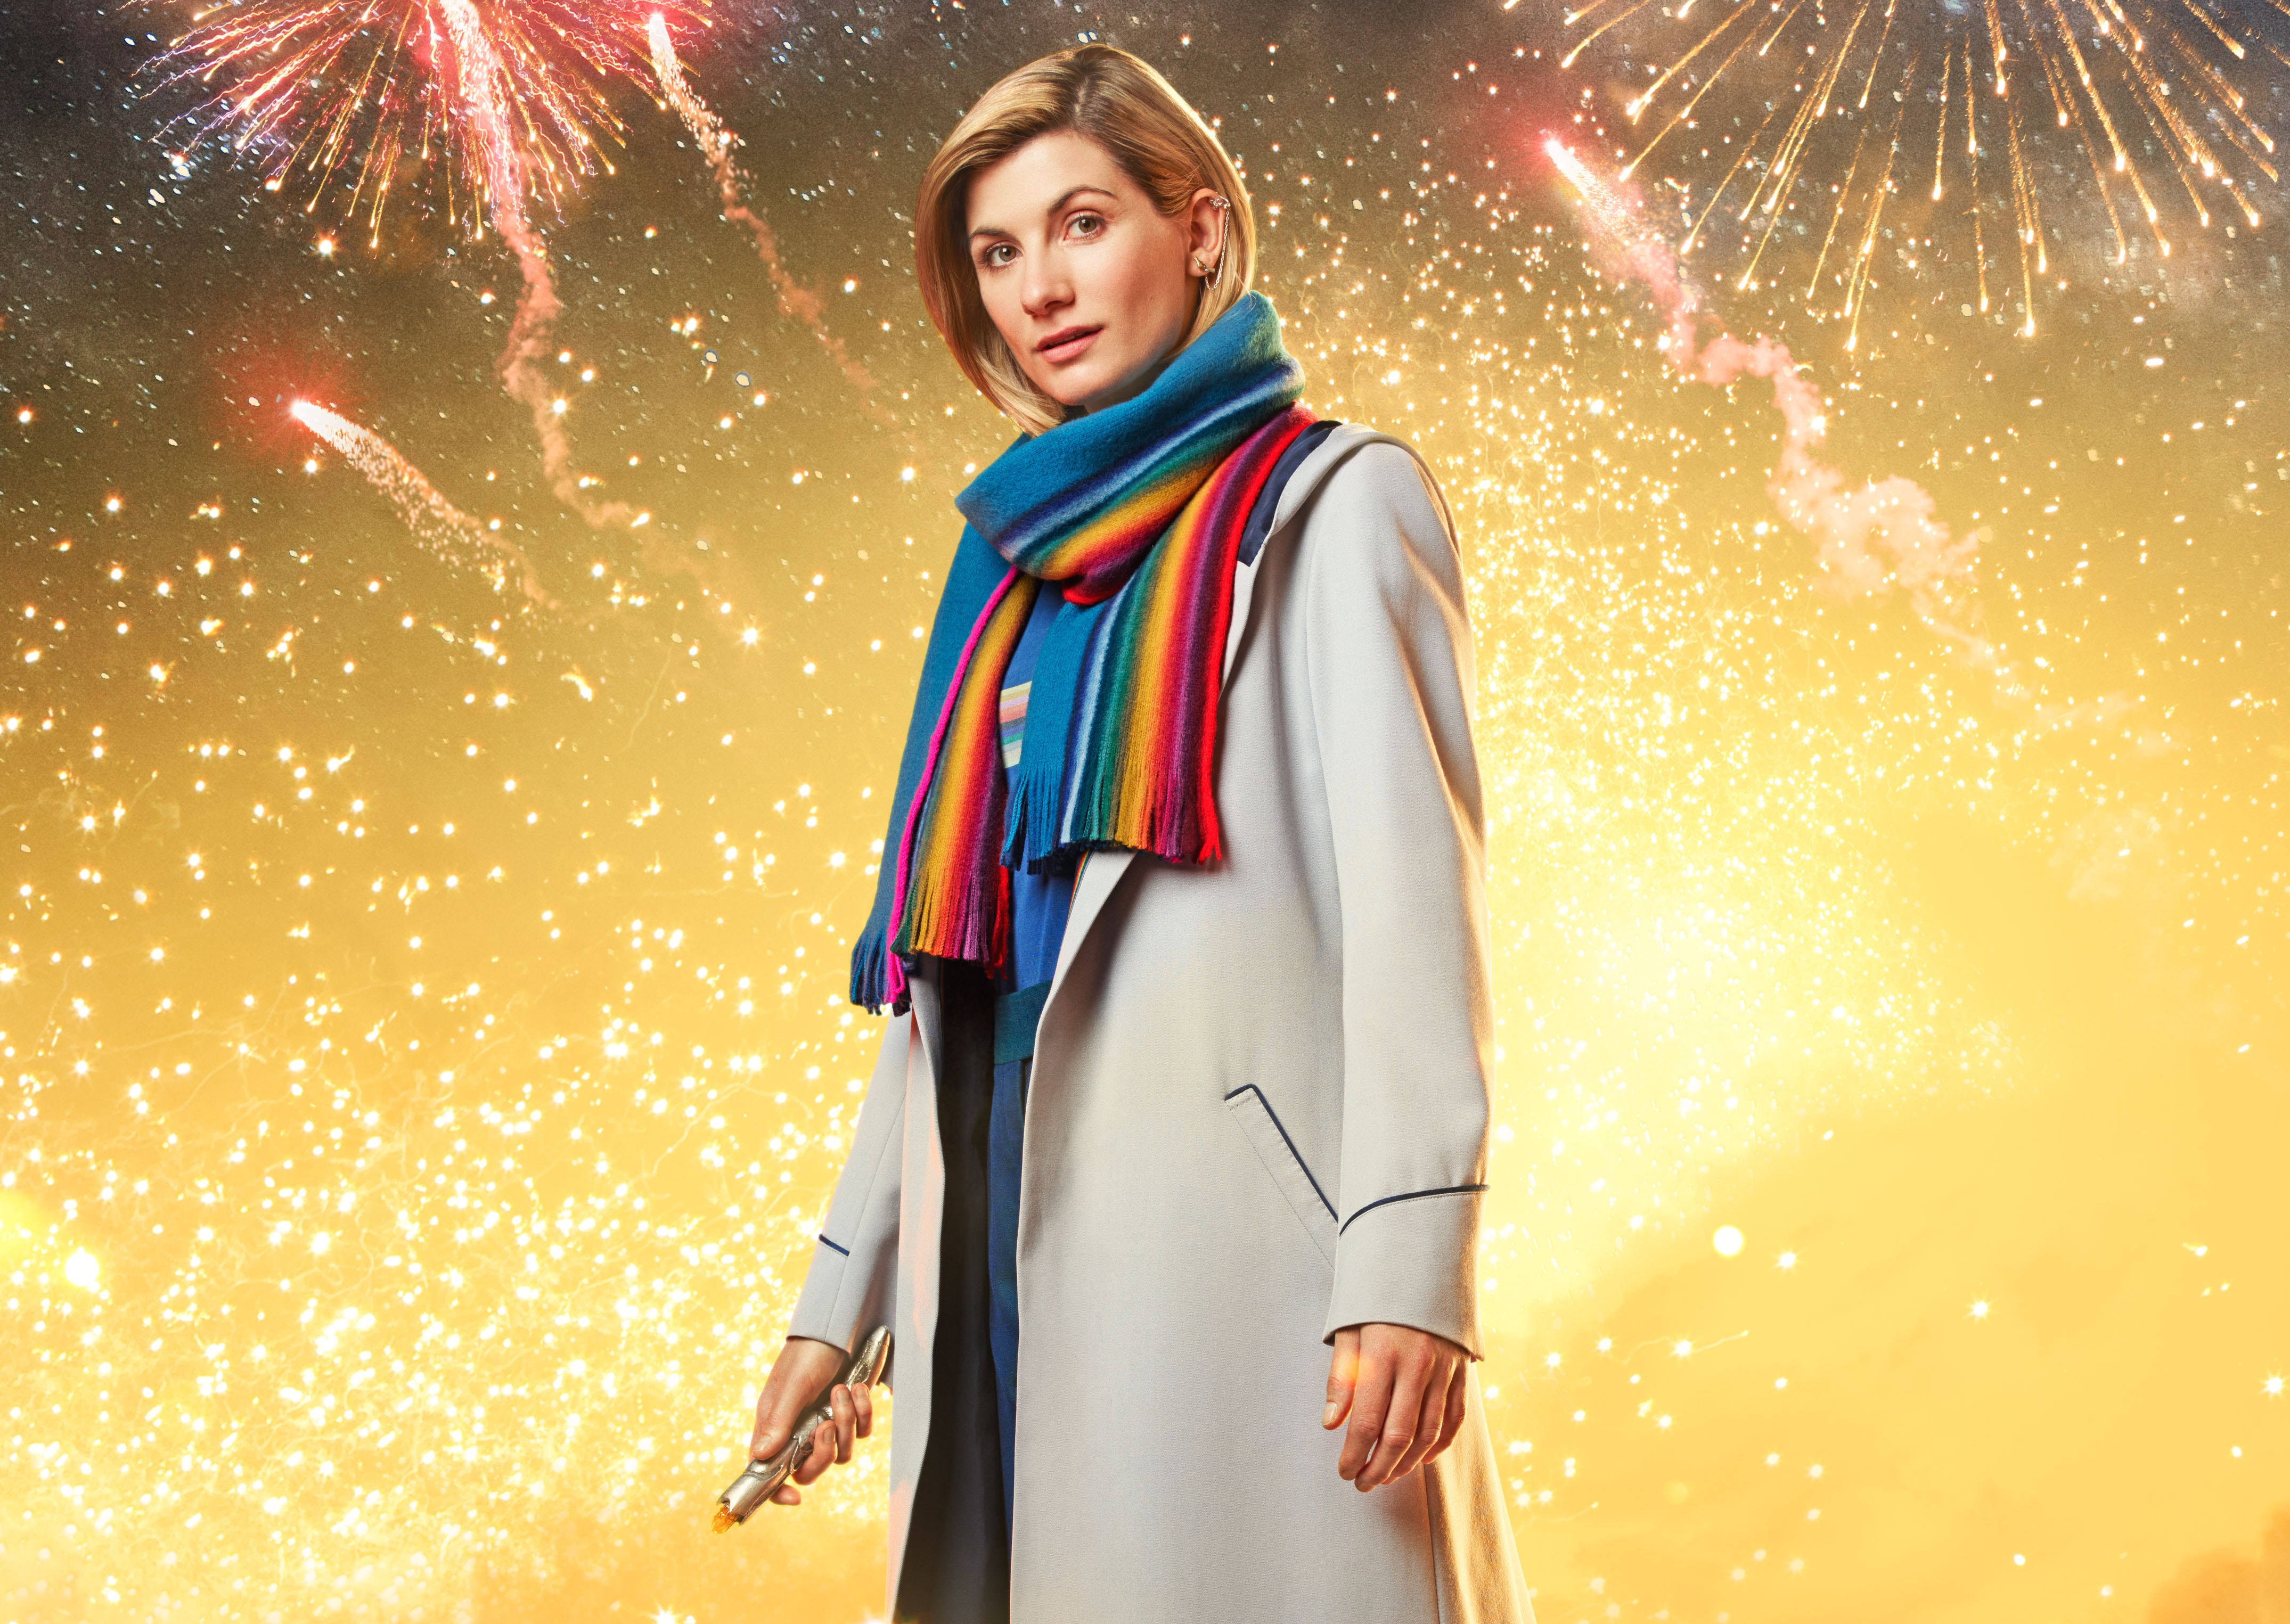 WARNING: Embargoed for publication until 00:00:01 on 27/11/2018 - Programme Name: Doctor Who  - TX: n/a - Episode: n/a (No. n/a) - Picture Shows: **Strictly Embargoed until 27/11/2018 00:00:01** The Doctor (JODIE WHITTAKER) - (C) BBC/ BBC Studios - Photographer: Henrik Knudson